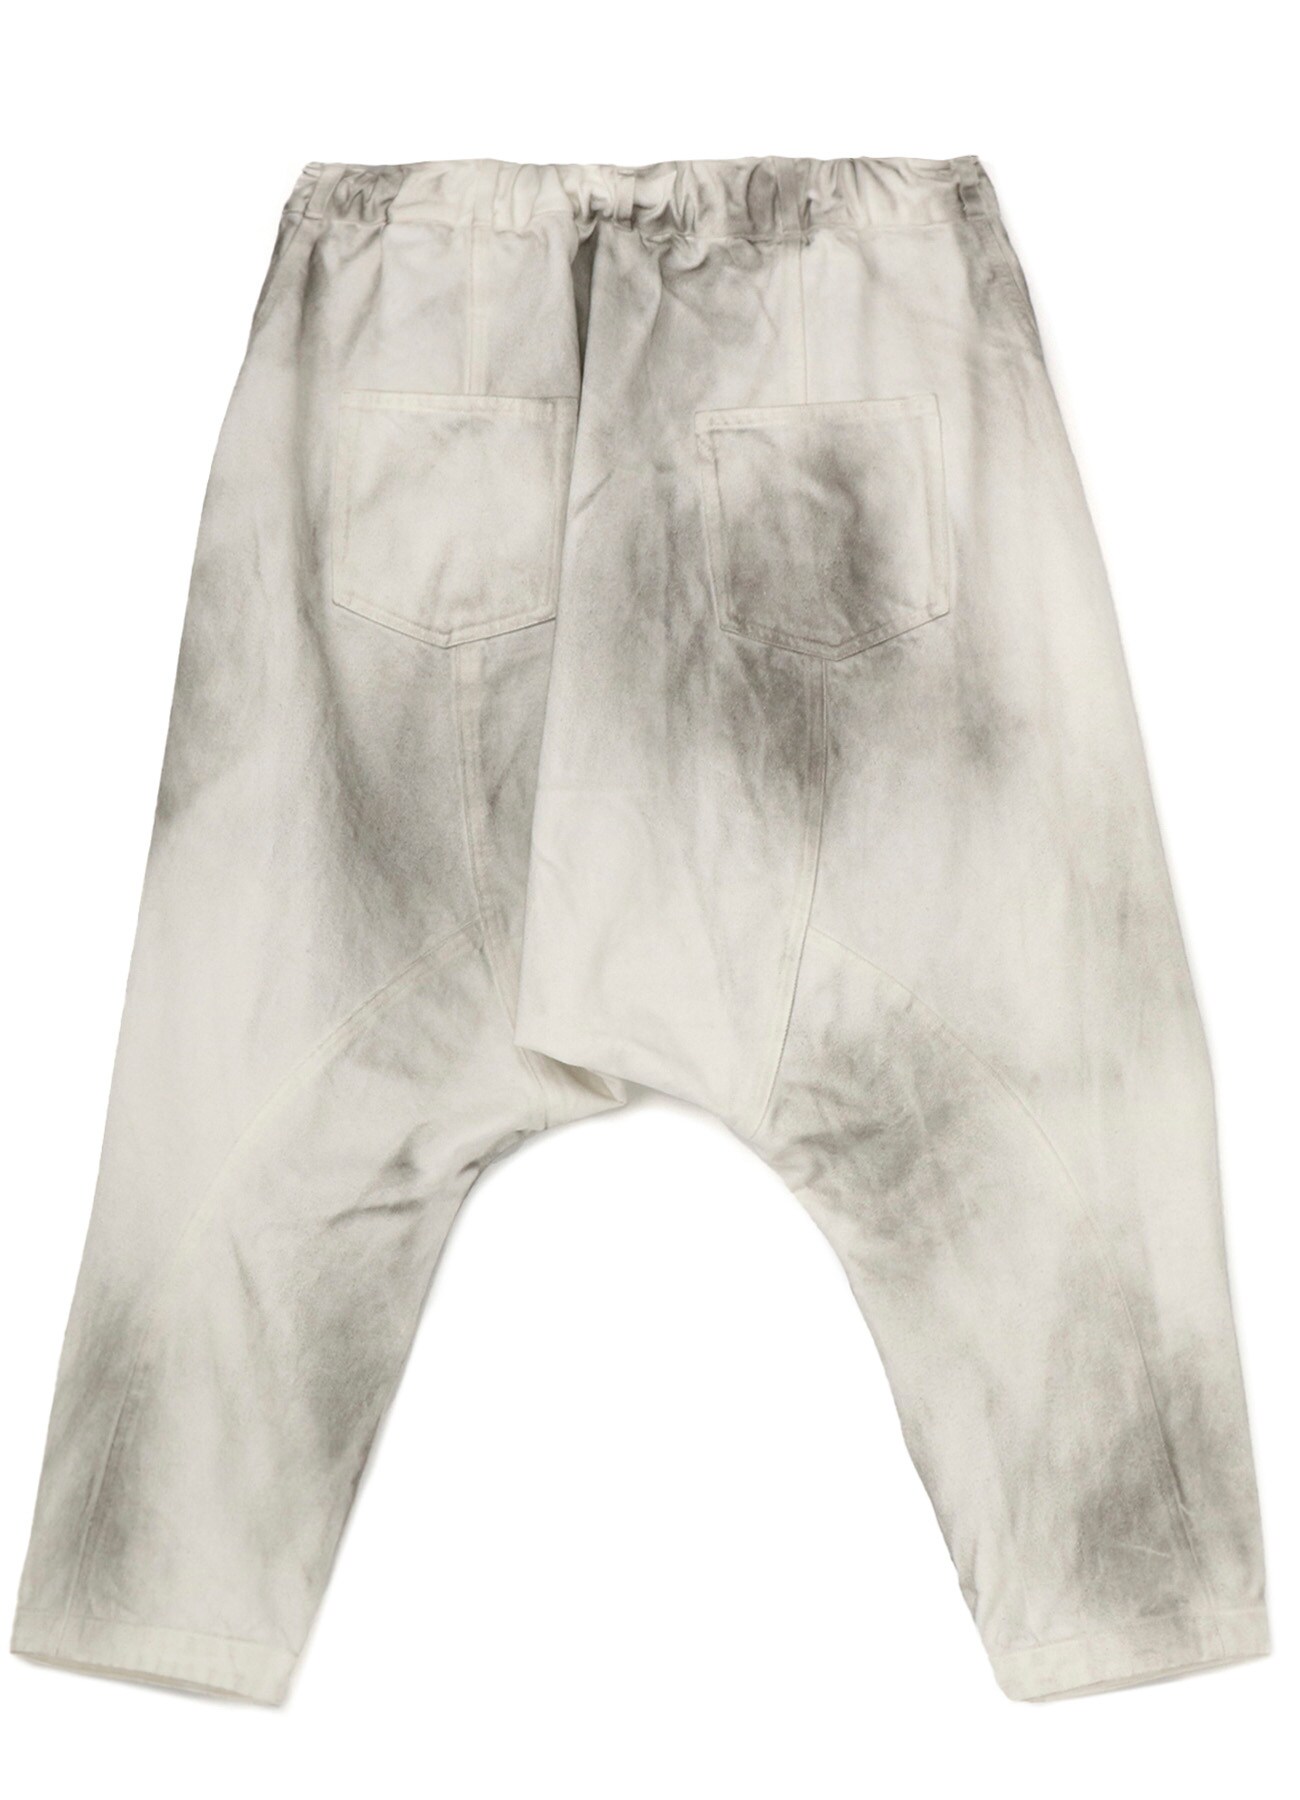 Cotton Thick Twill Aging Slim Sarouel Pants (M White): S'YTE 